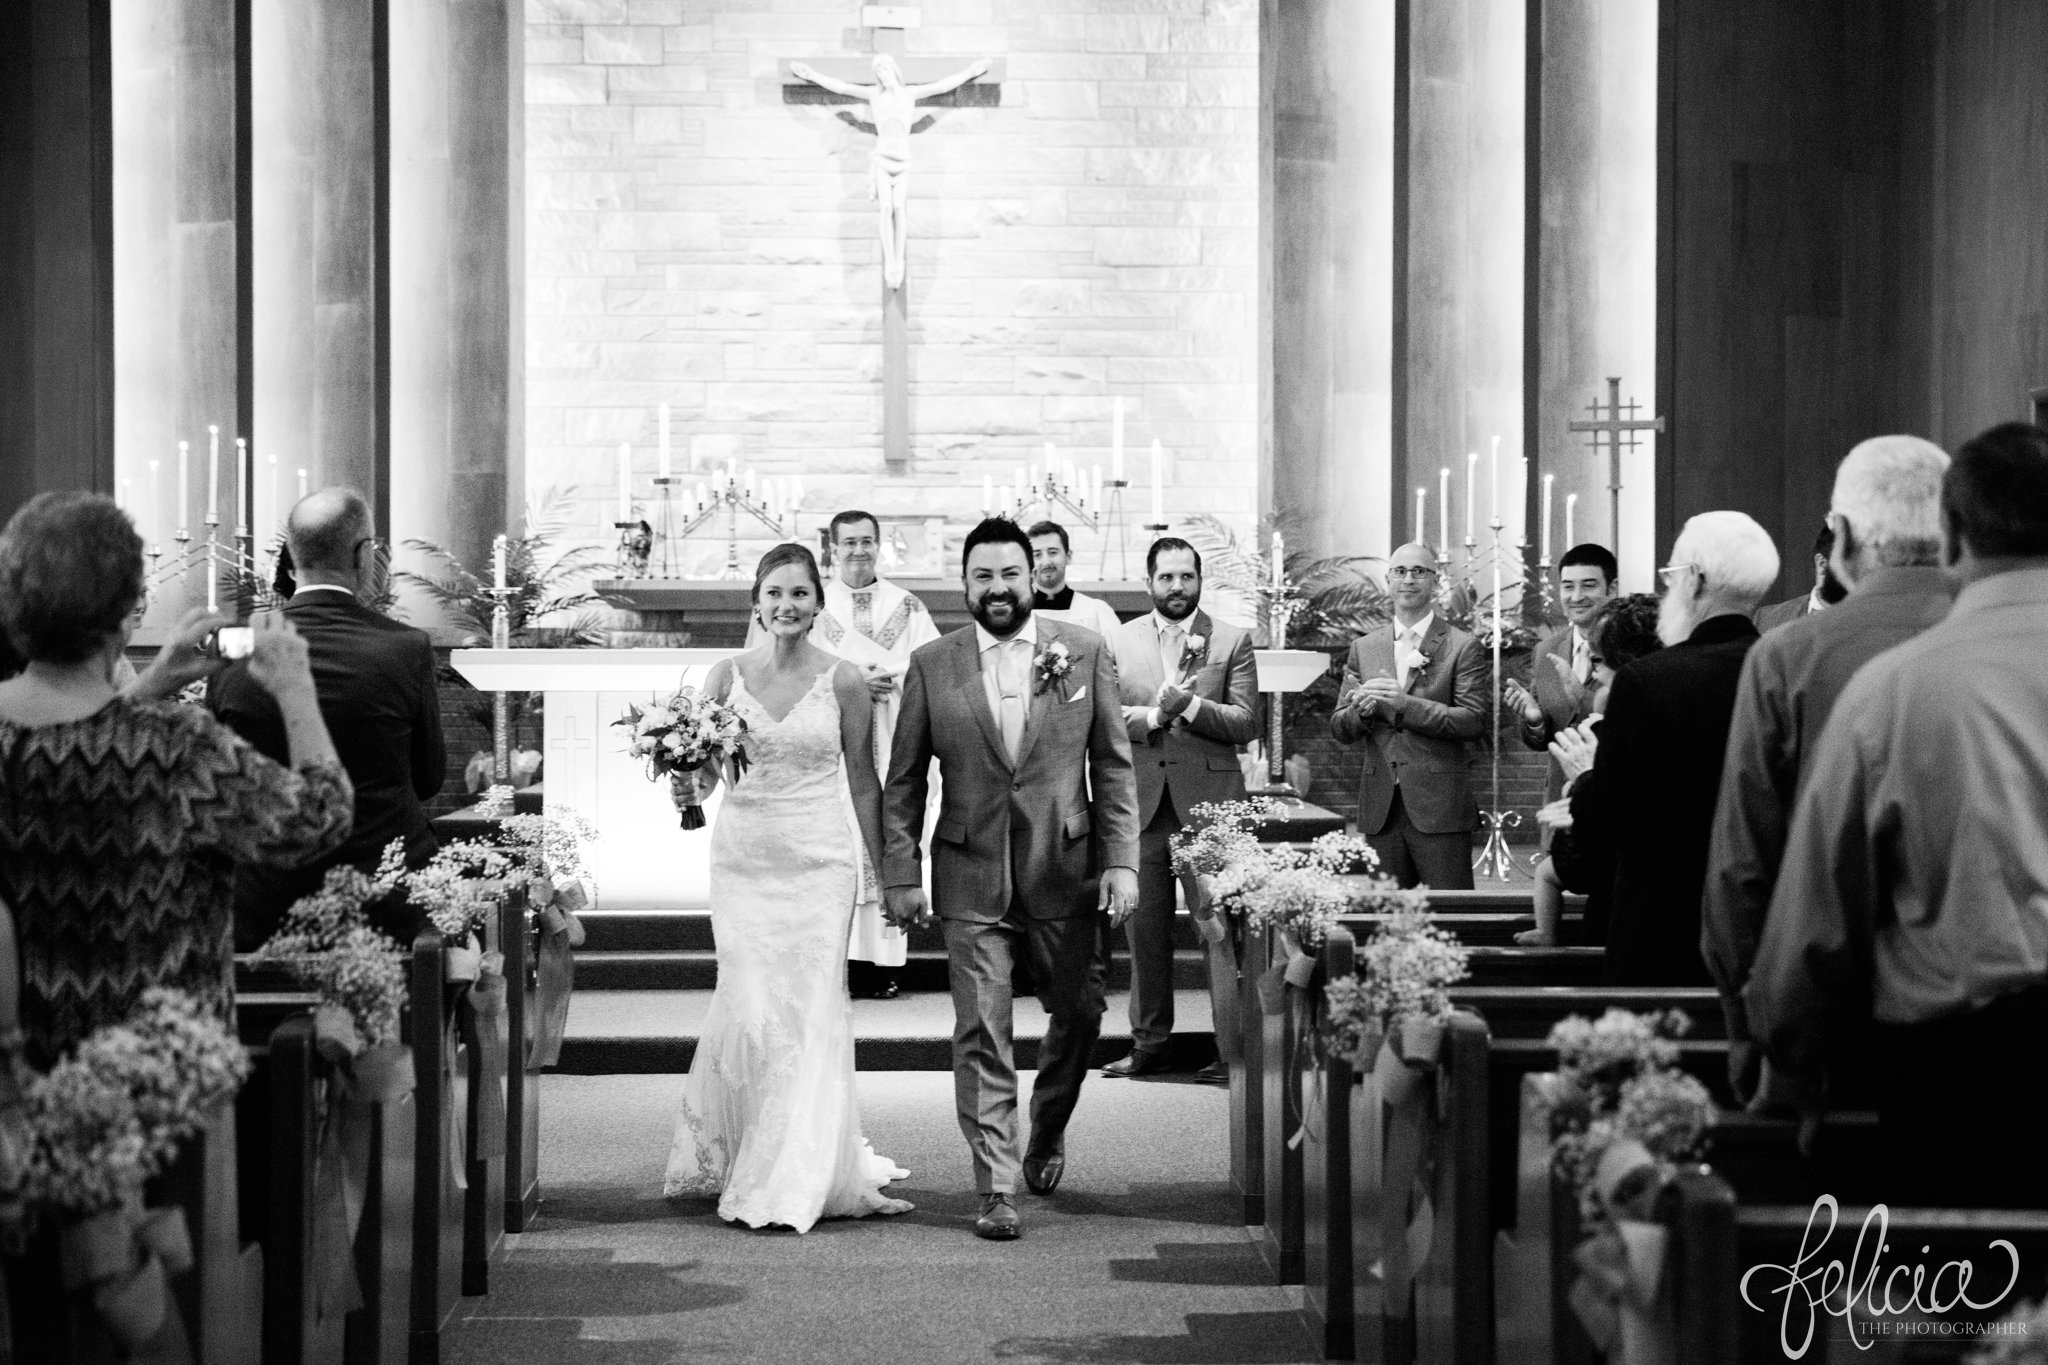 Black and White | Wedding | Wedding Photography | Wedding Photos | Travel Photographer | Images by feliciathephotographer.com | Wedding Ceremony | Sacred Heart Catholic Church | Bride and Groom | Church Exit | Man and Wife | Holding Hands 